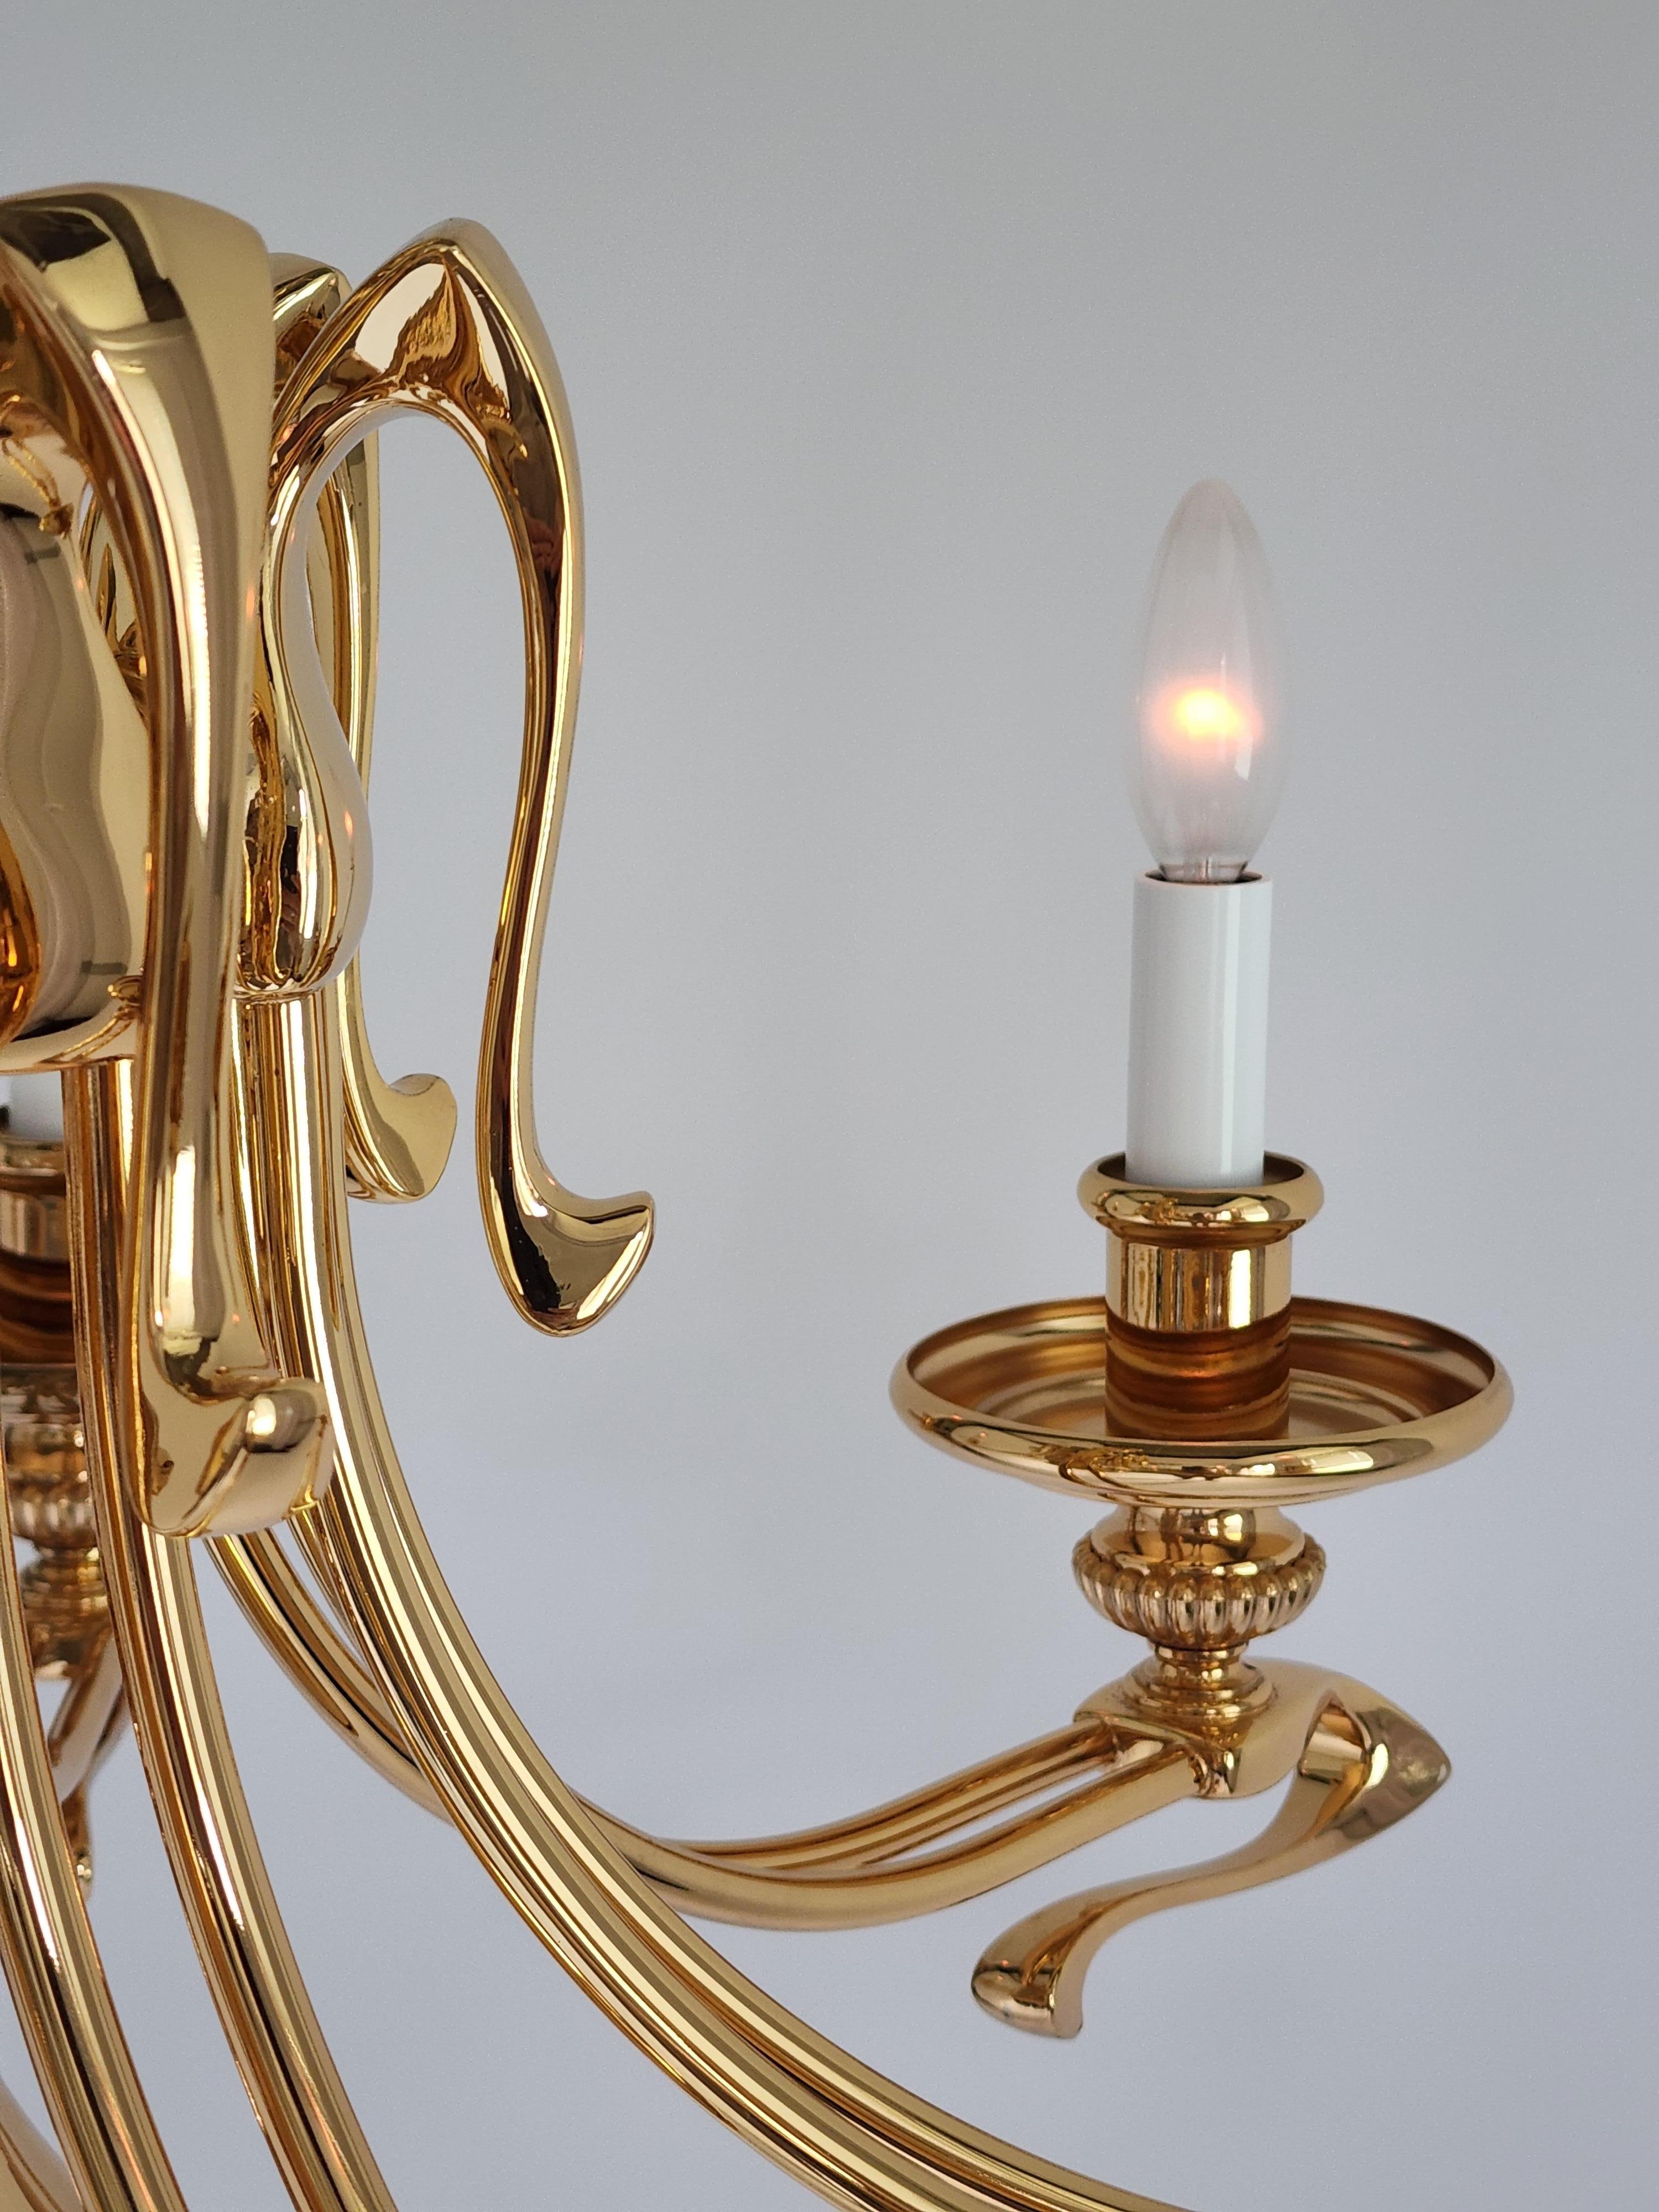 1980s Massive Art Nouveau Style Gold Plated Chandelier, Italy For Sale 9